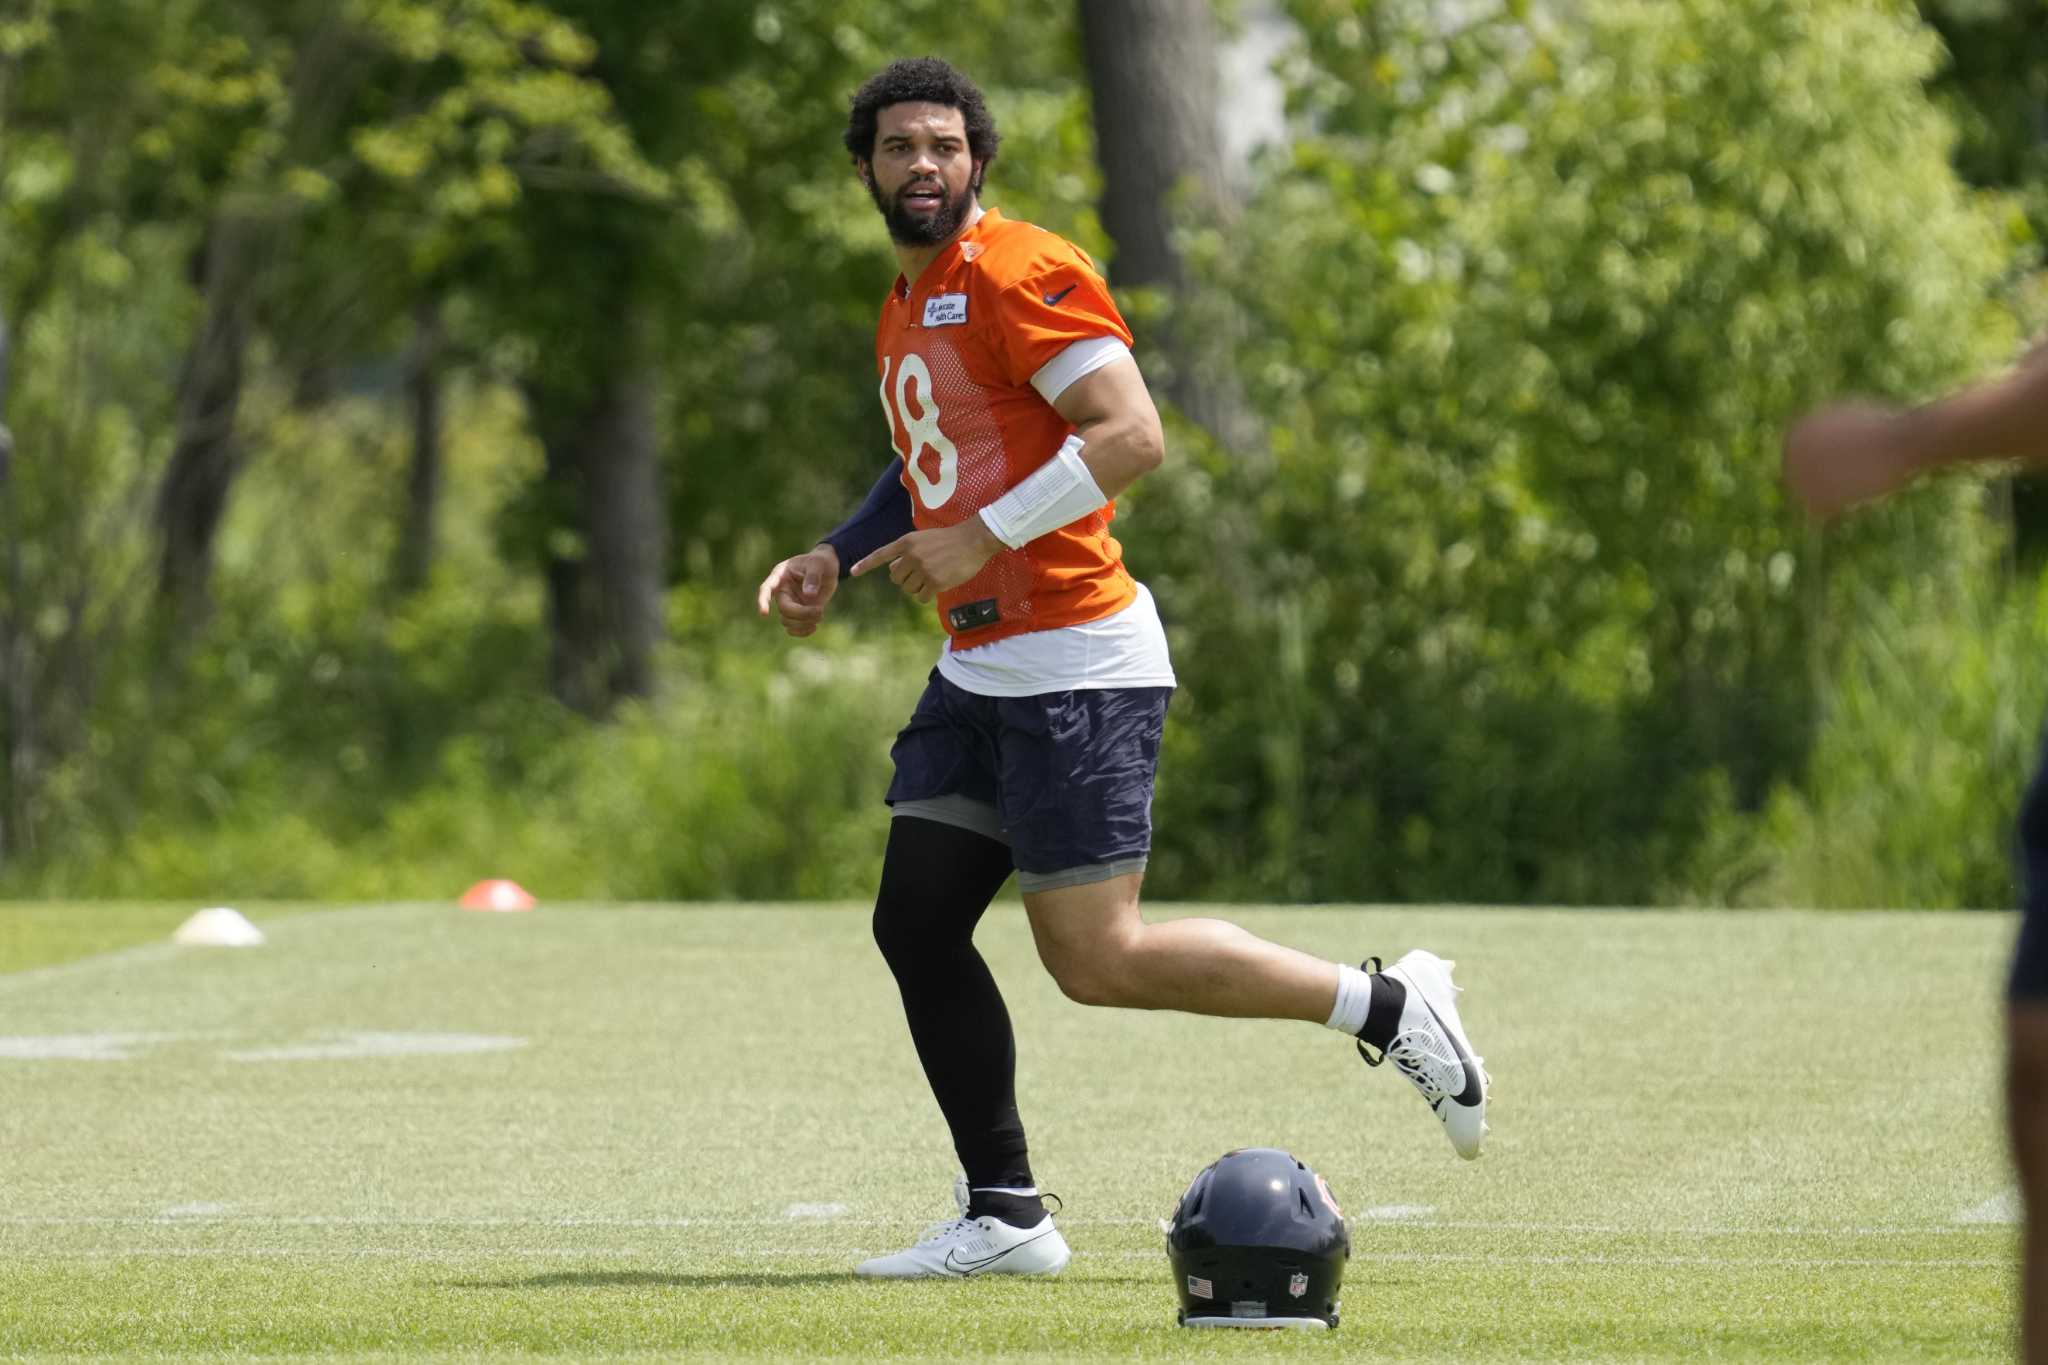 Chicago Bears are ready to embrace 'Hard Knocks' cameras this summer